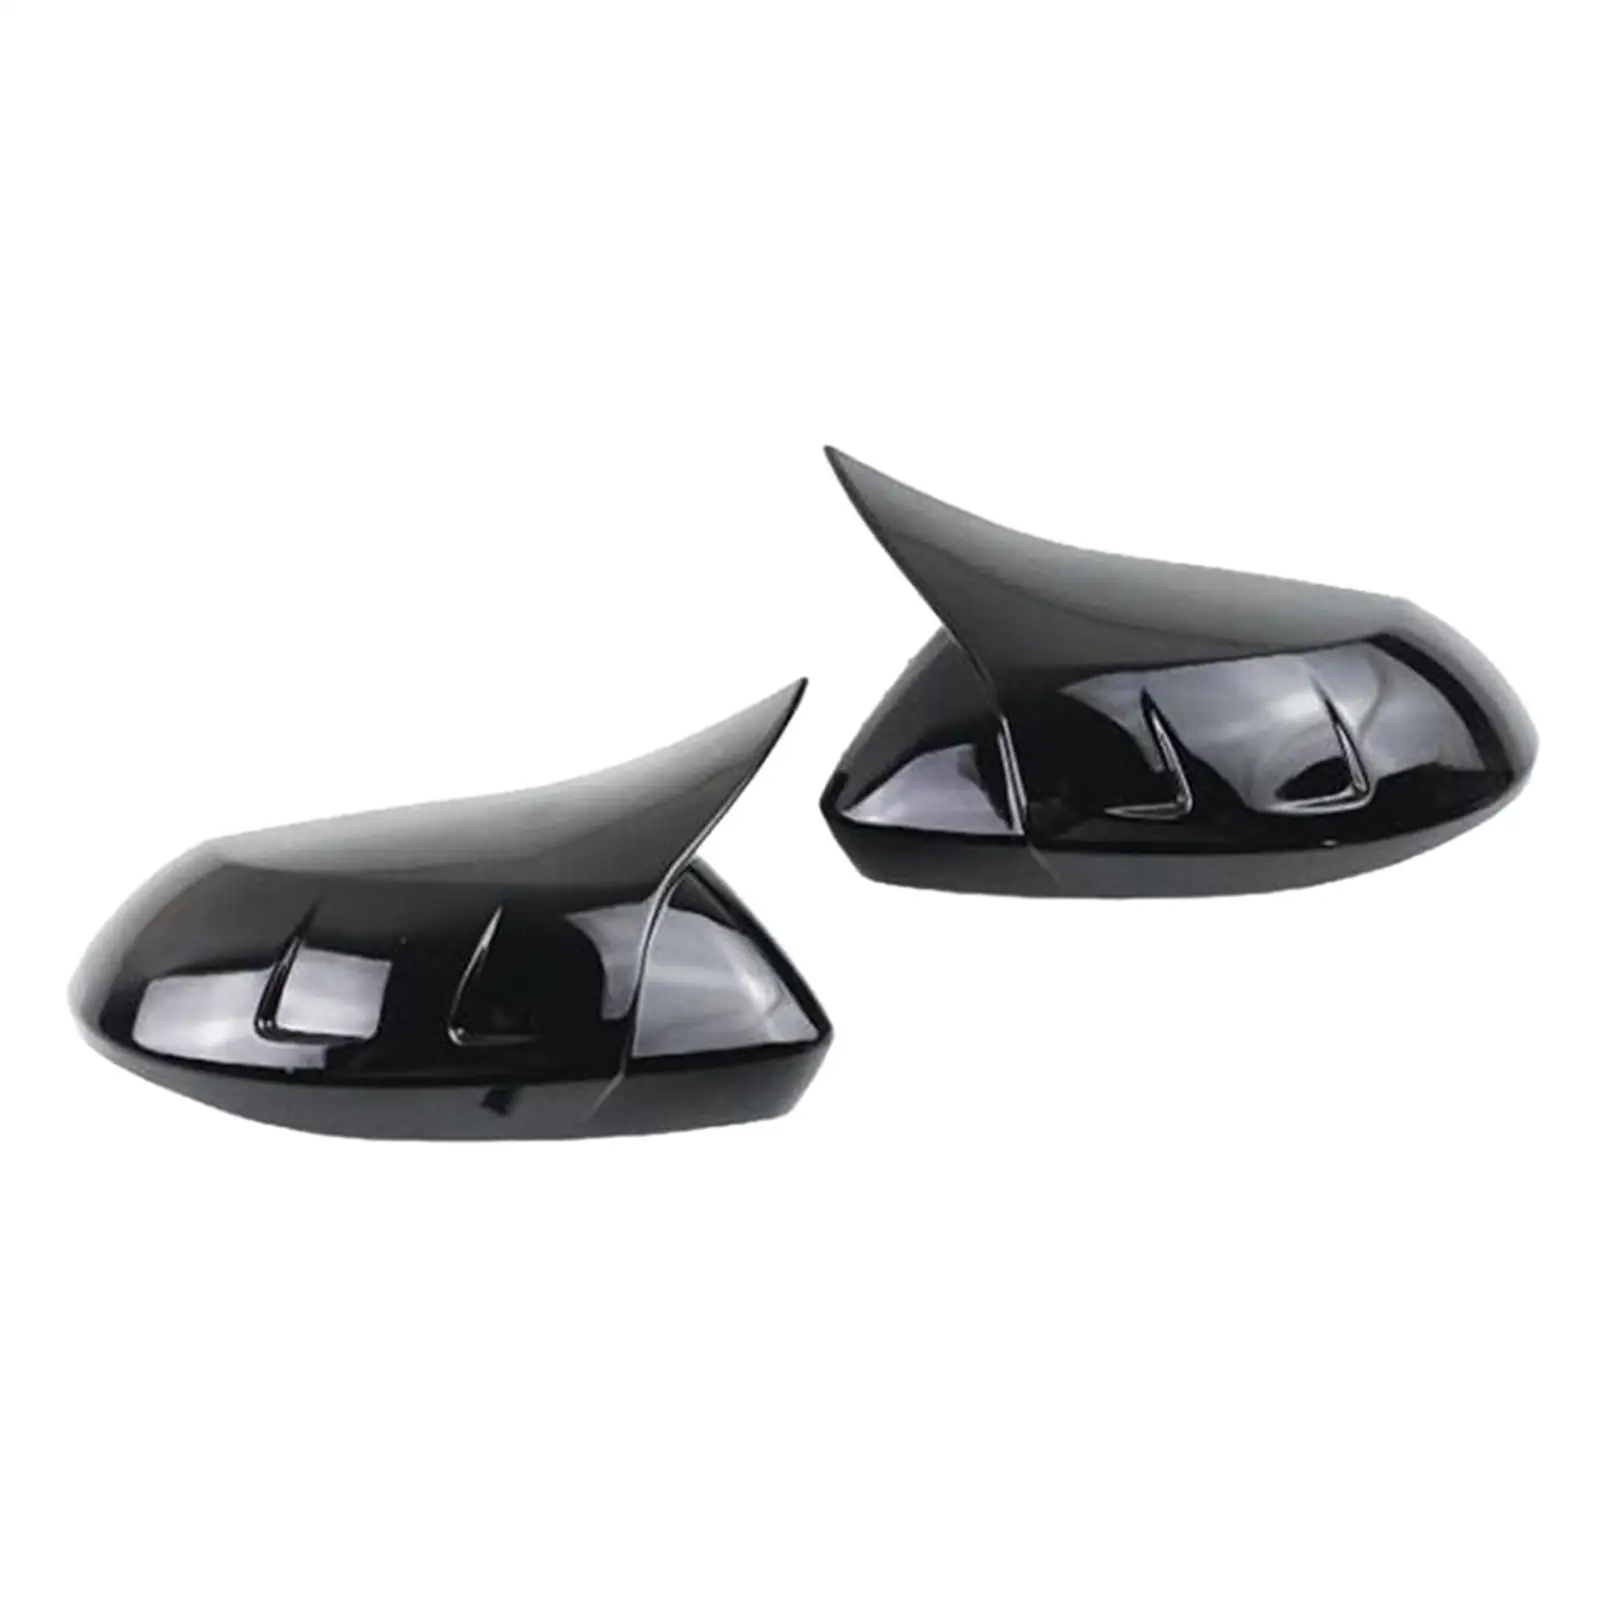 Rearview Mirror Cover Caps for 2019 2020 Spare Parts